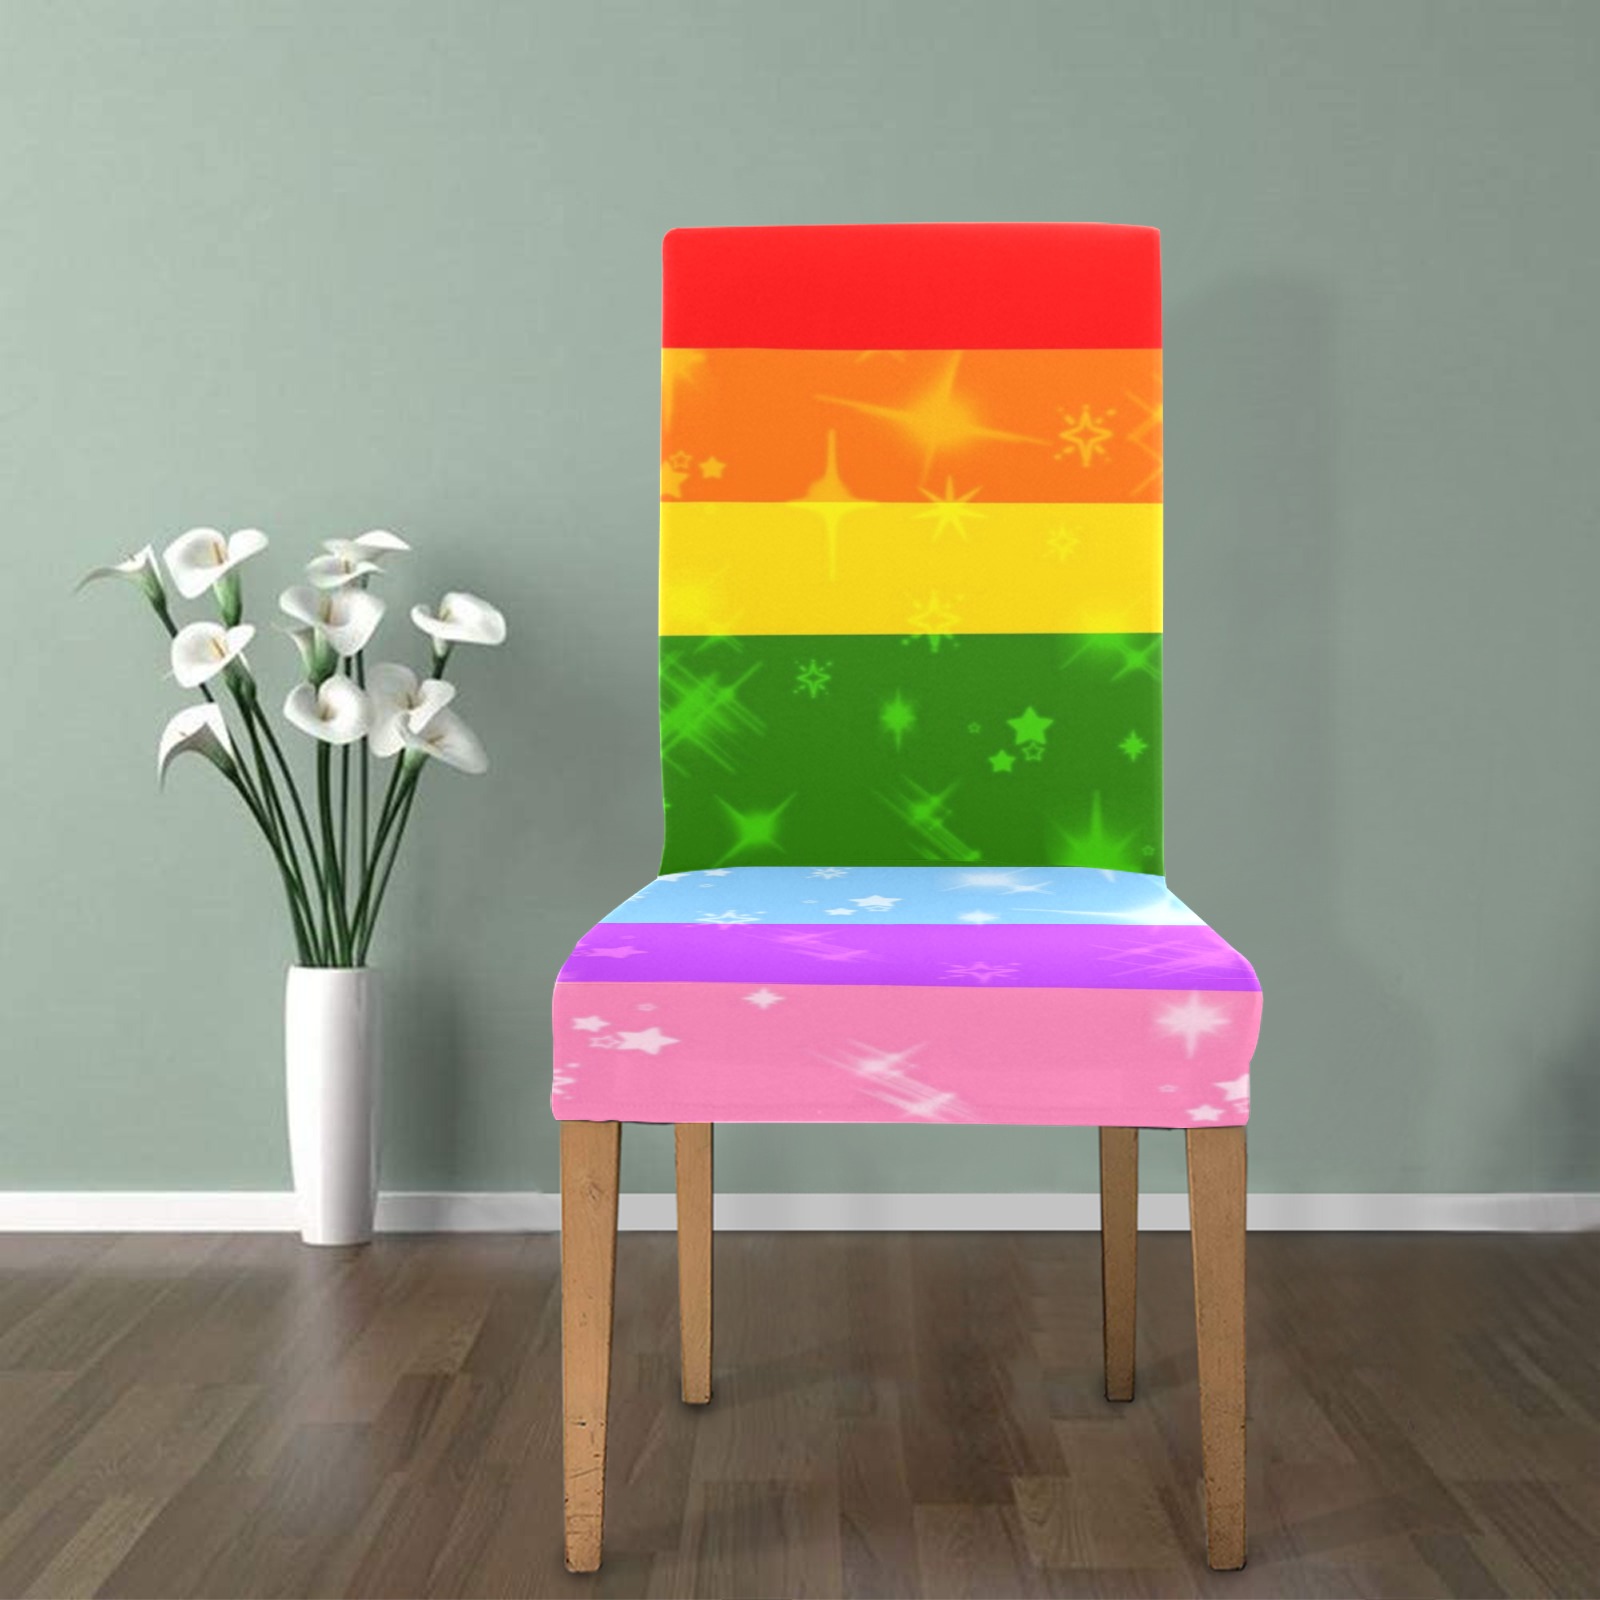 Proud by Nico Bielow Removable Dining Chair Cover